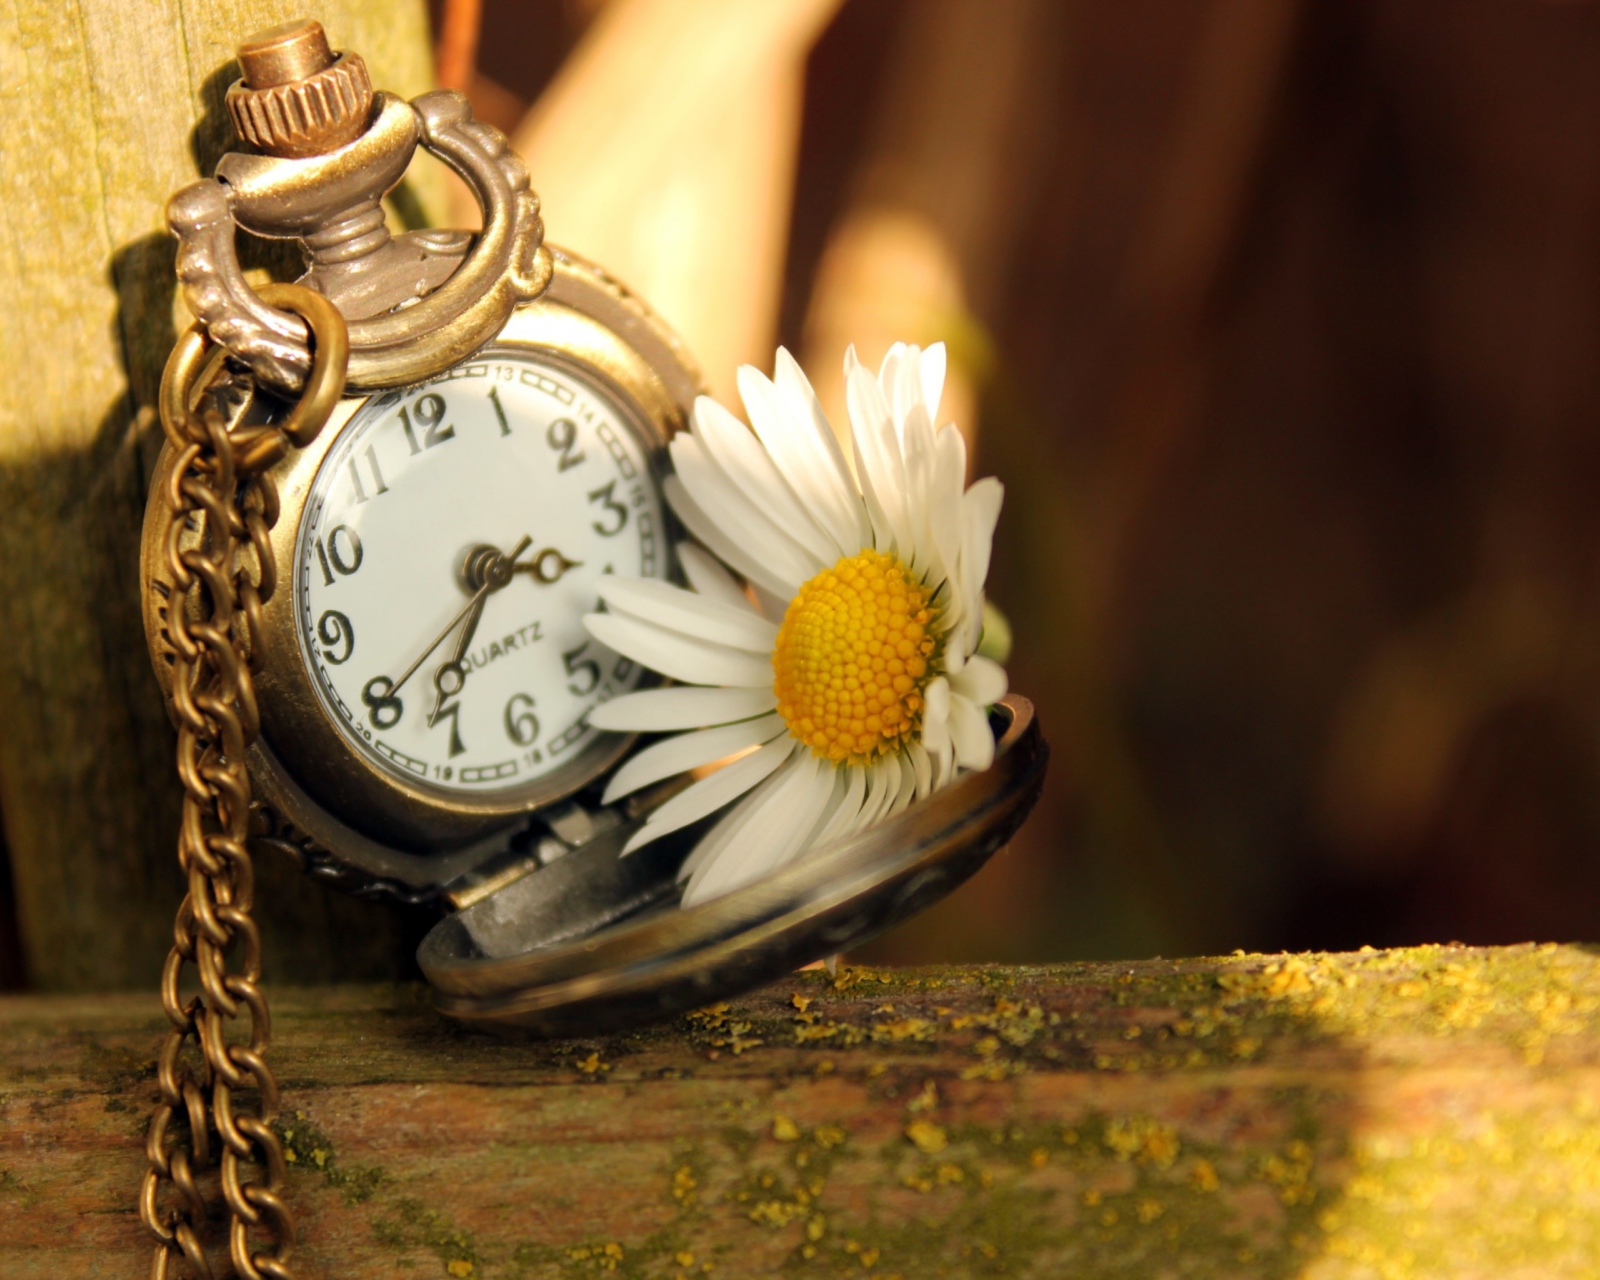 Vintage Watch And Daisy screenshot #1 1600x1280